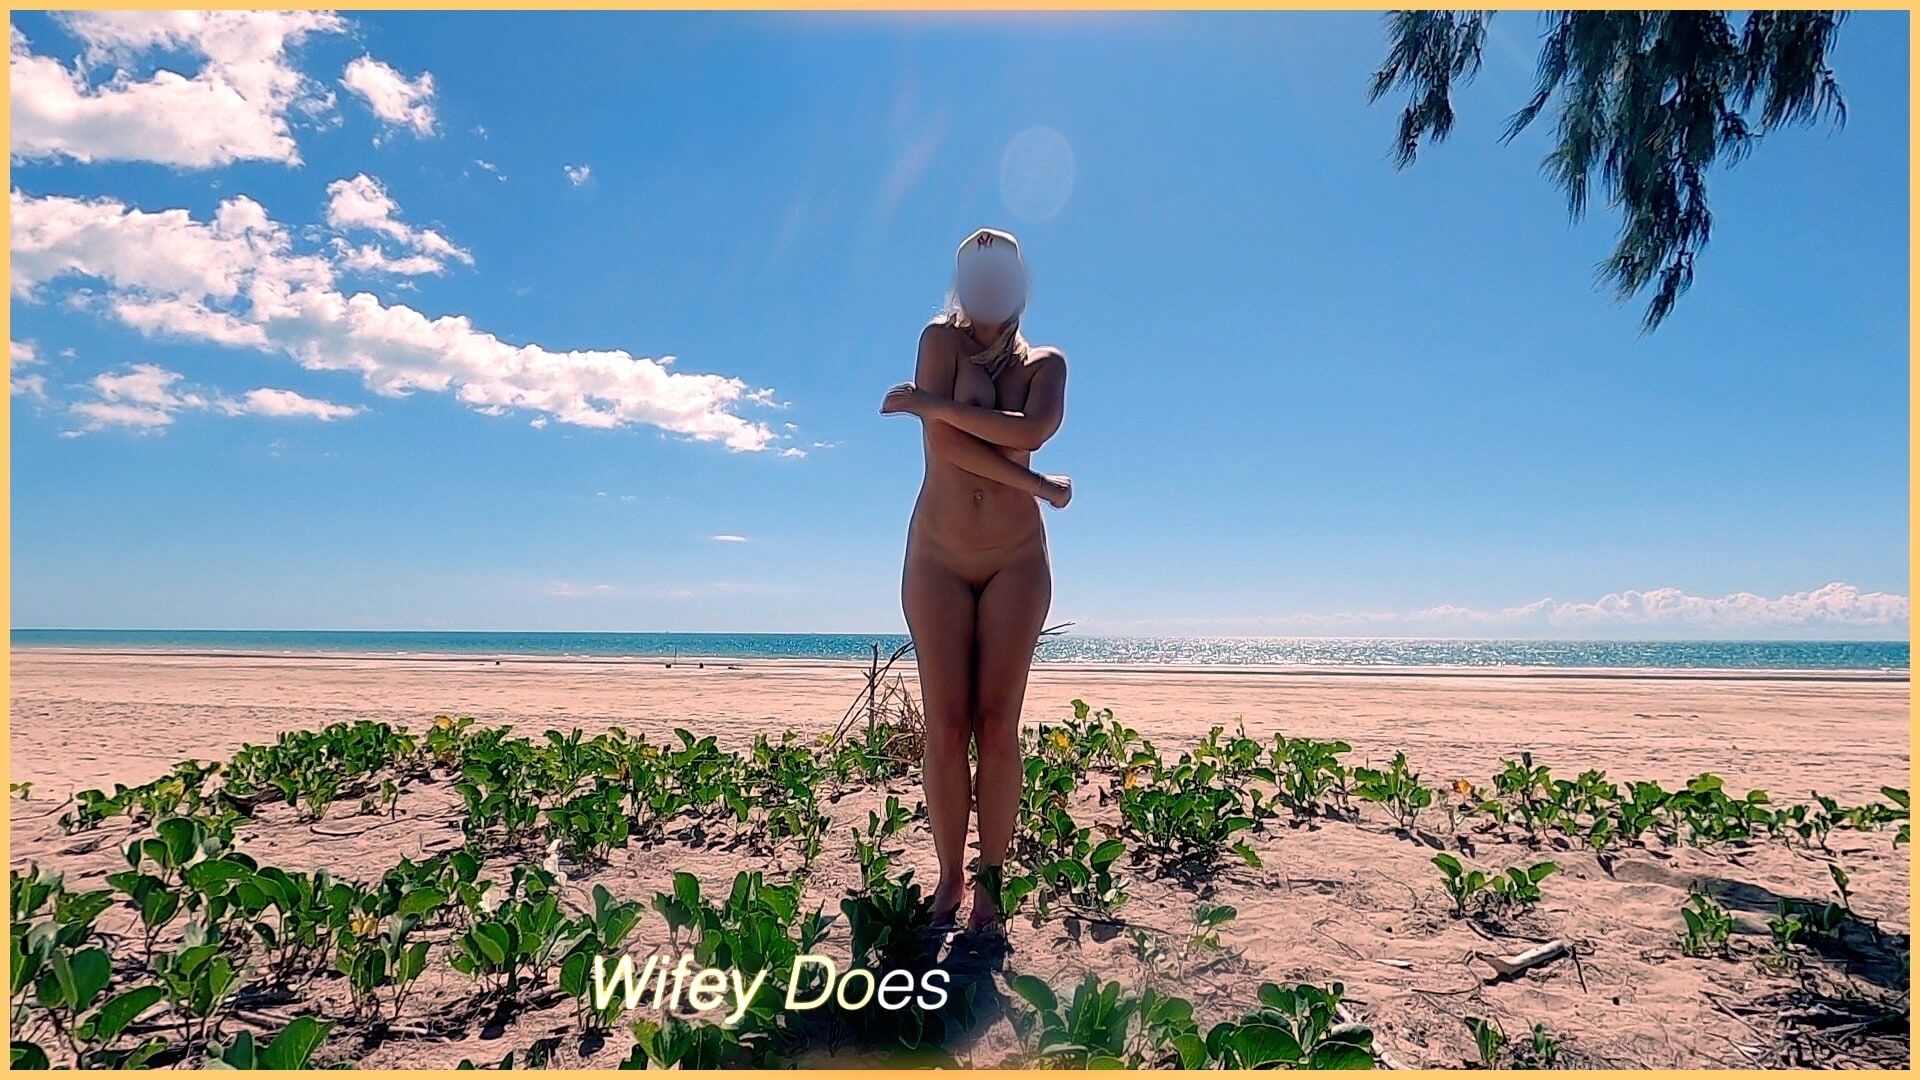 Wifey goes dancing nude at a public beach